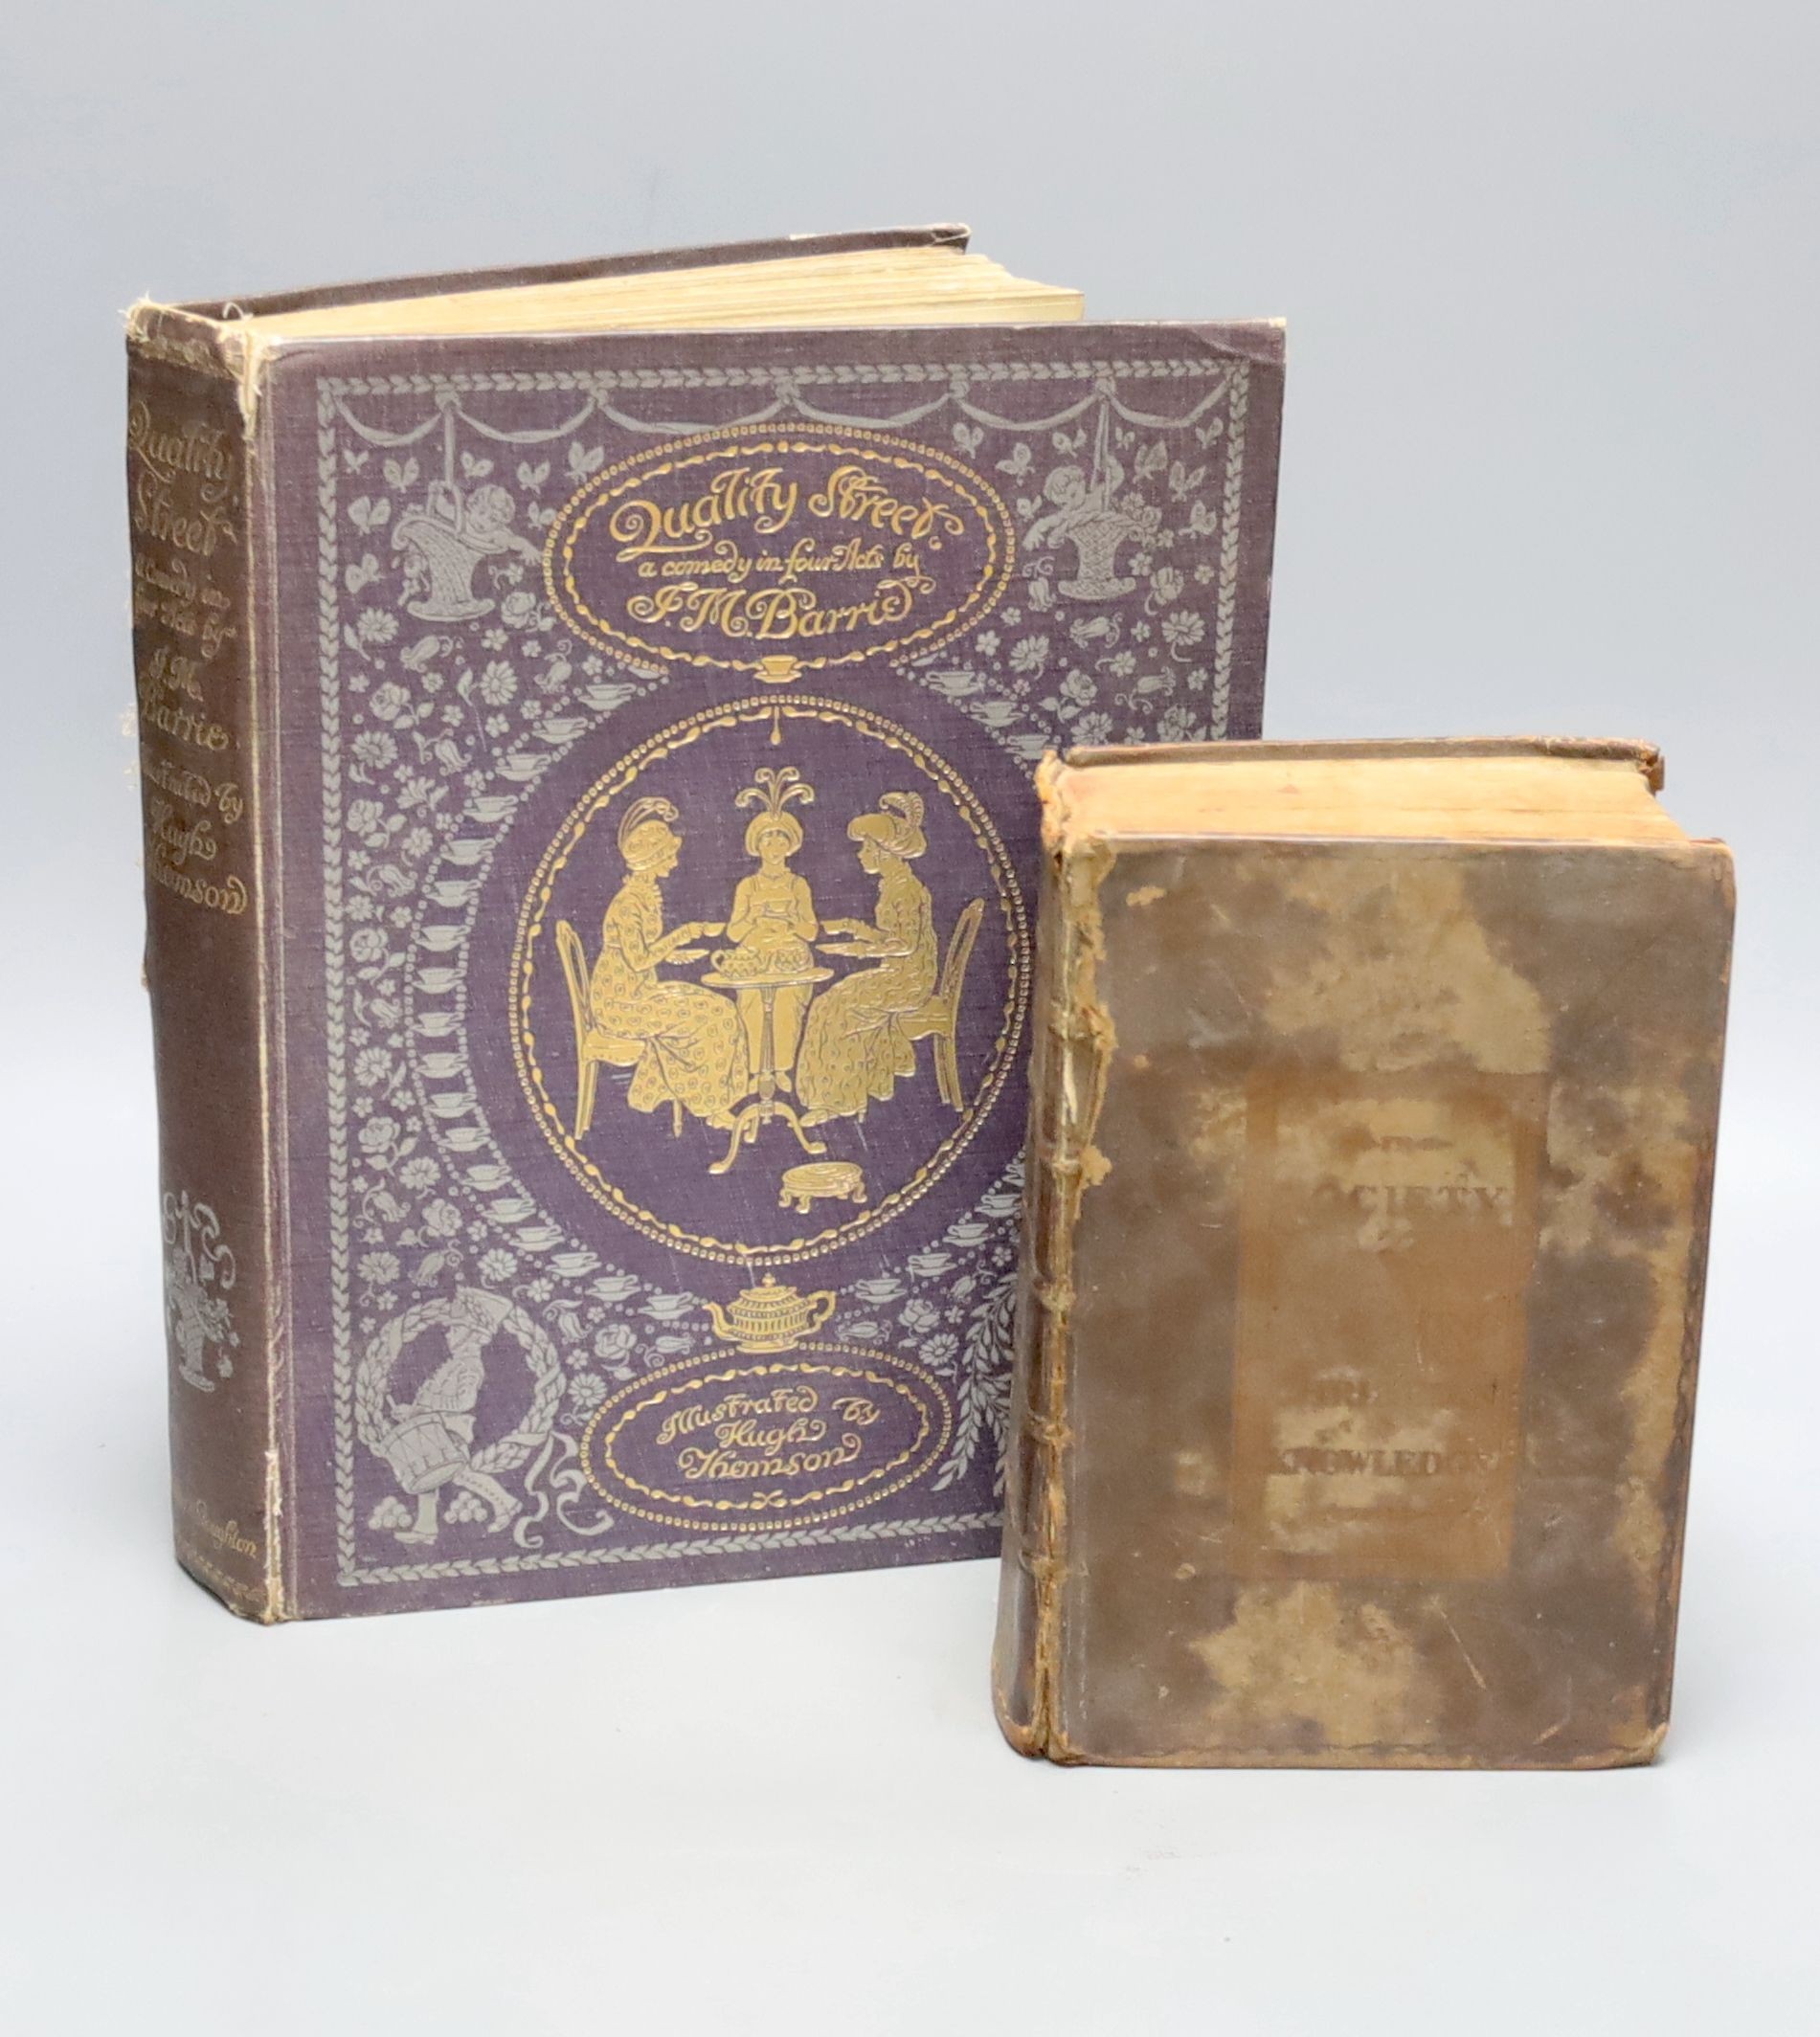 Barrie, J.M. Quality Street, illustrated by Hugh Thomson, and another, Society for Promoting Christian Knowledge, full calf